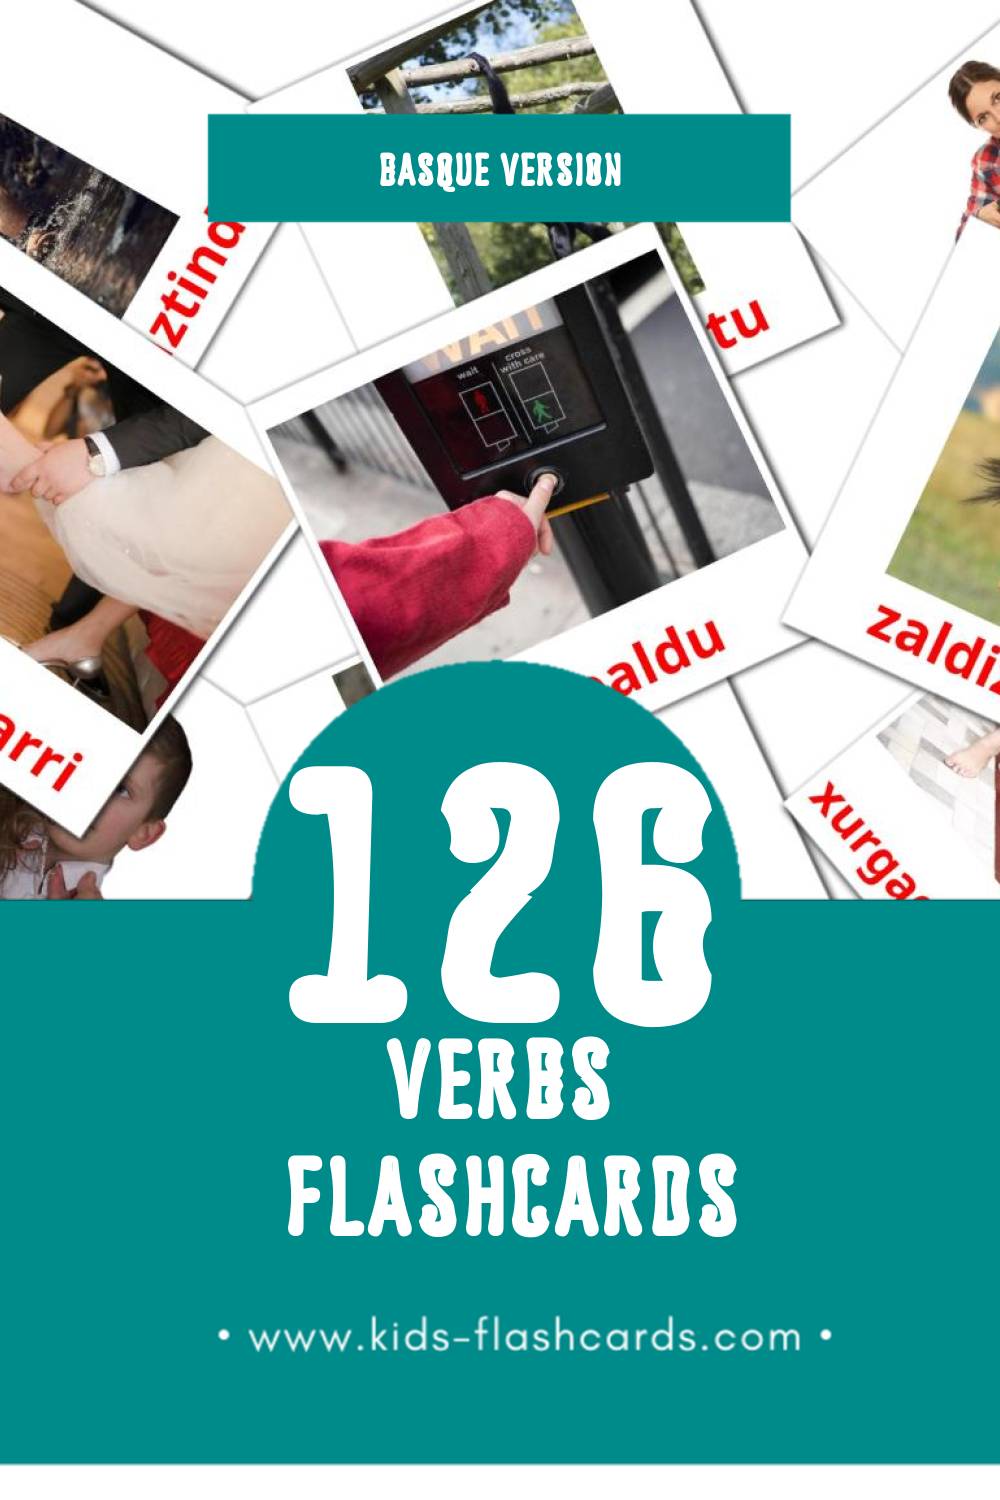 Visual Aditzak Flashcards for Toddlers (132 cards in Basque)